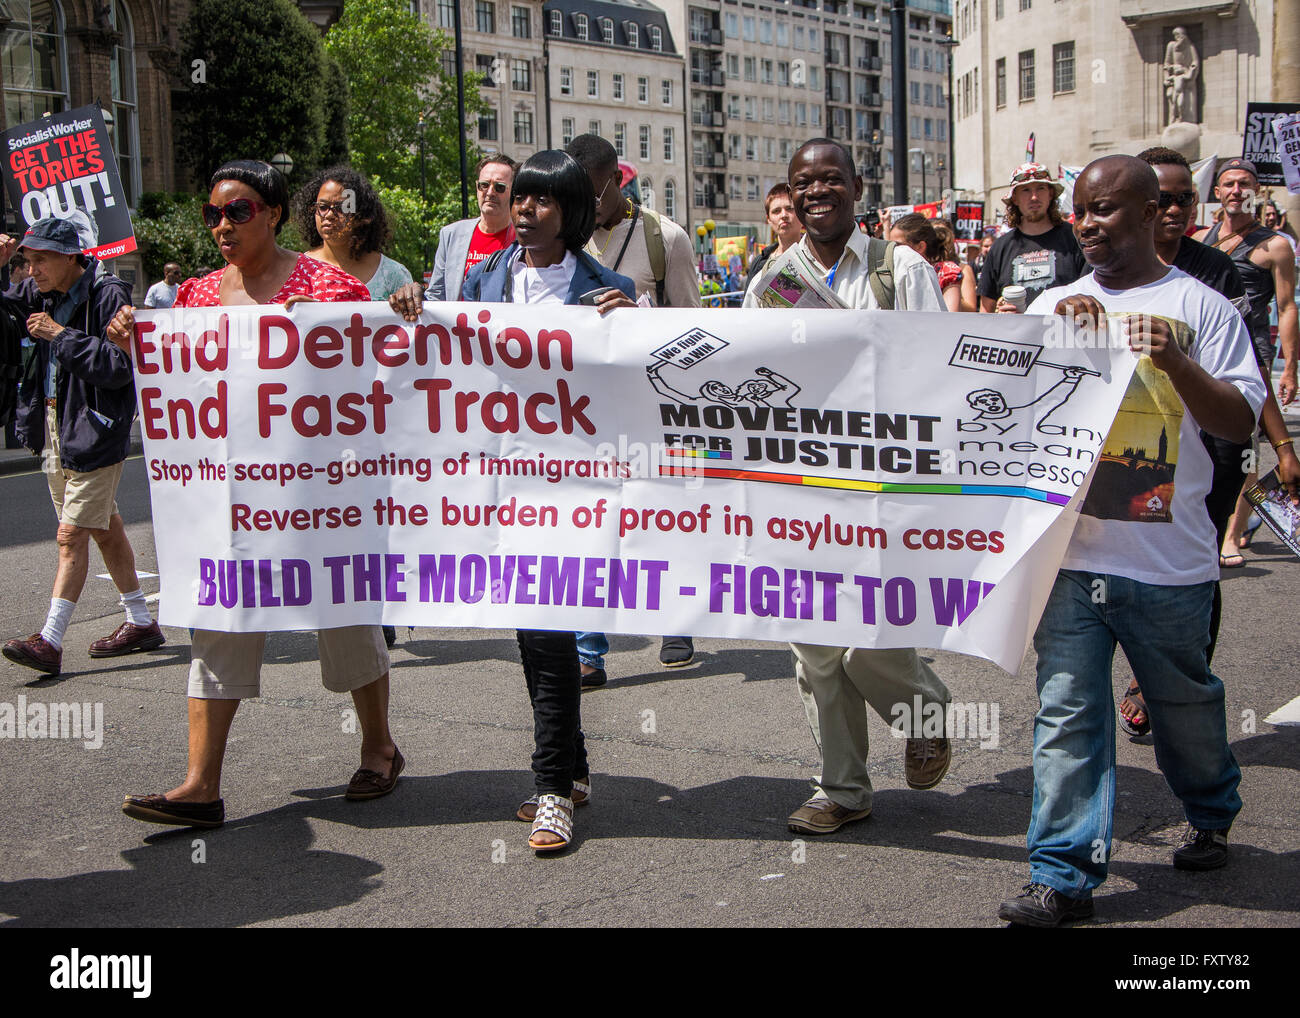 In defense of migrants at  People's Assembly march/ rally "No More Austerity", June 21, 2014 London Stock Photo